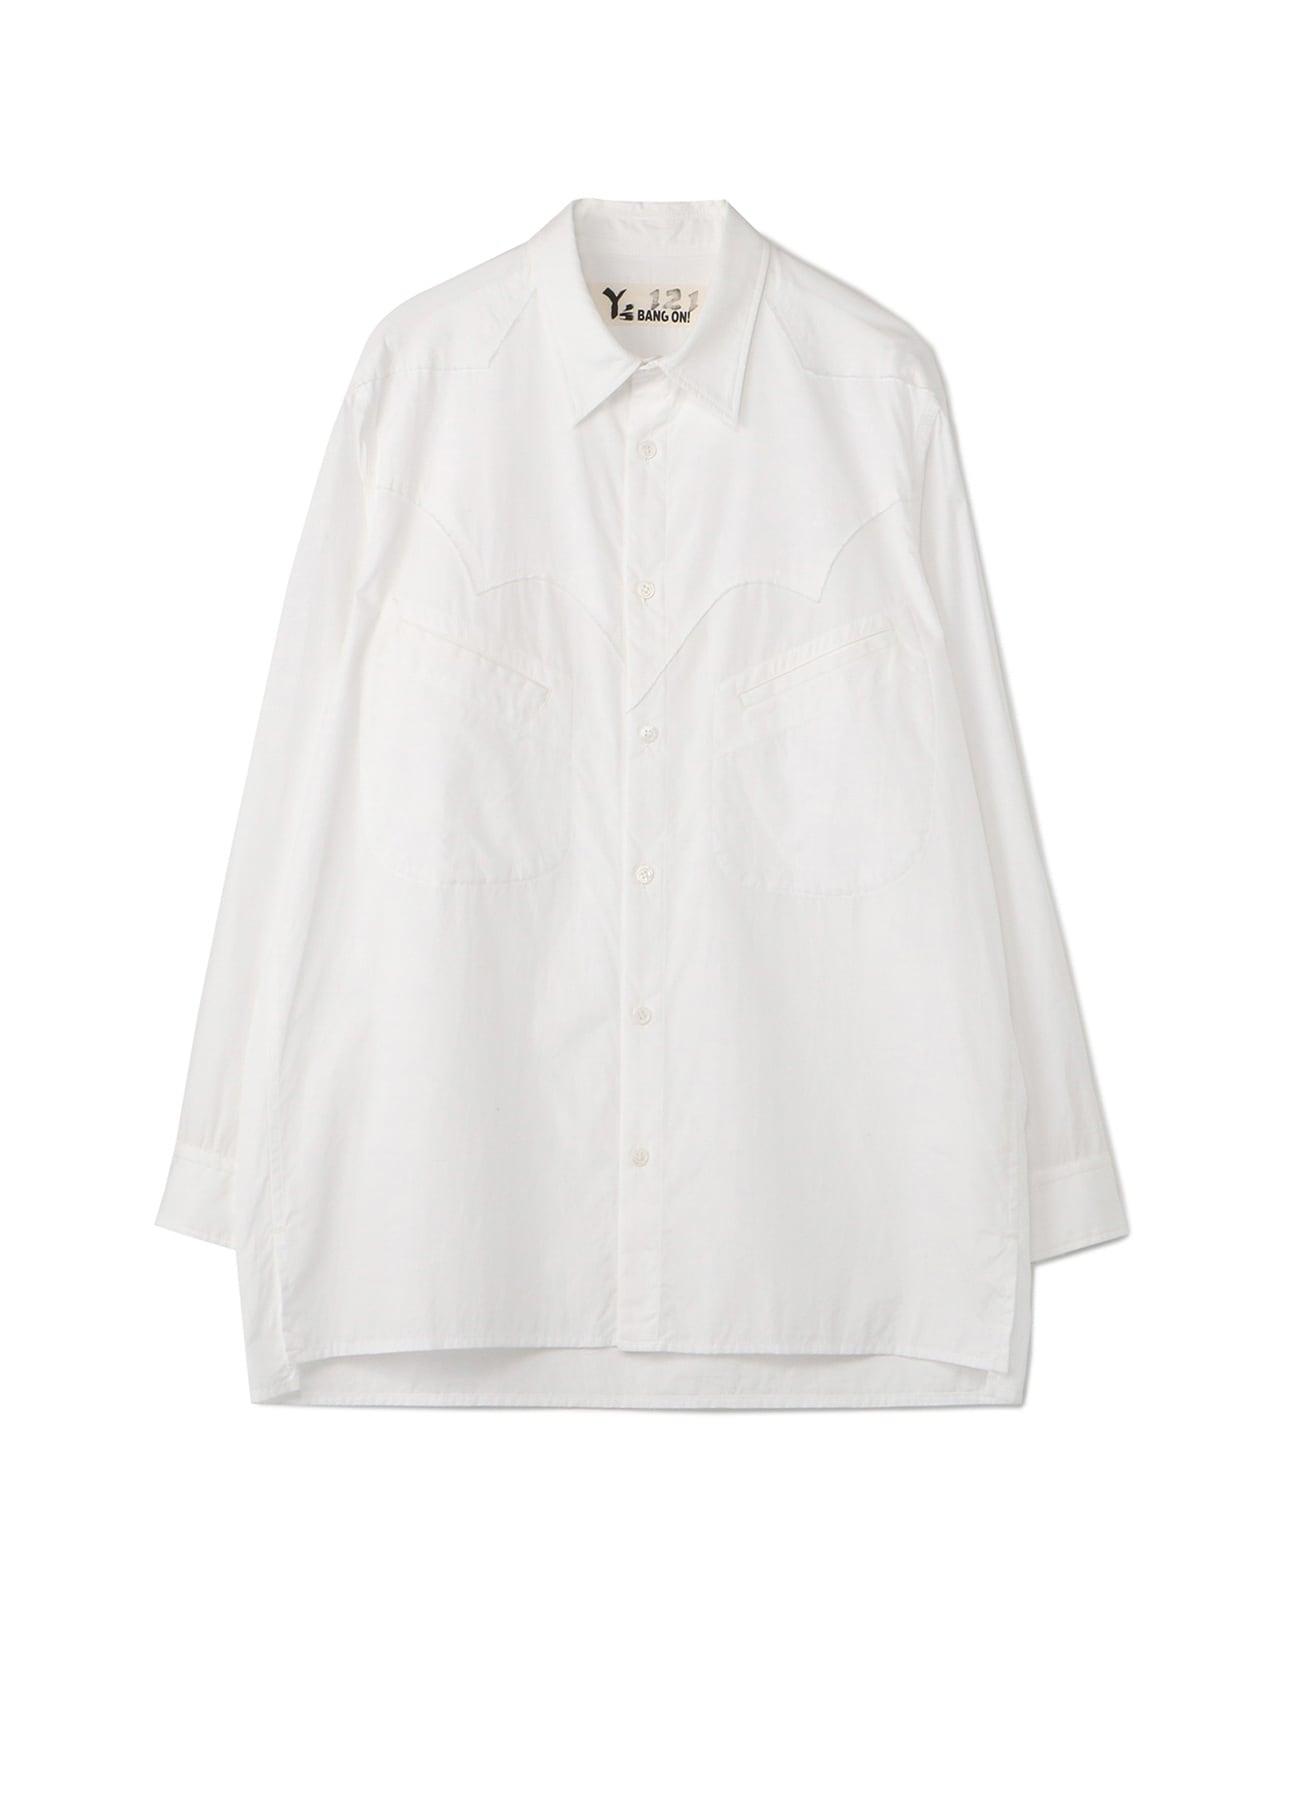 Y's BANG ON!No.121 Western style-shirts Cotton broad